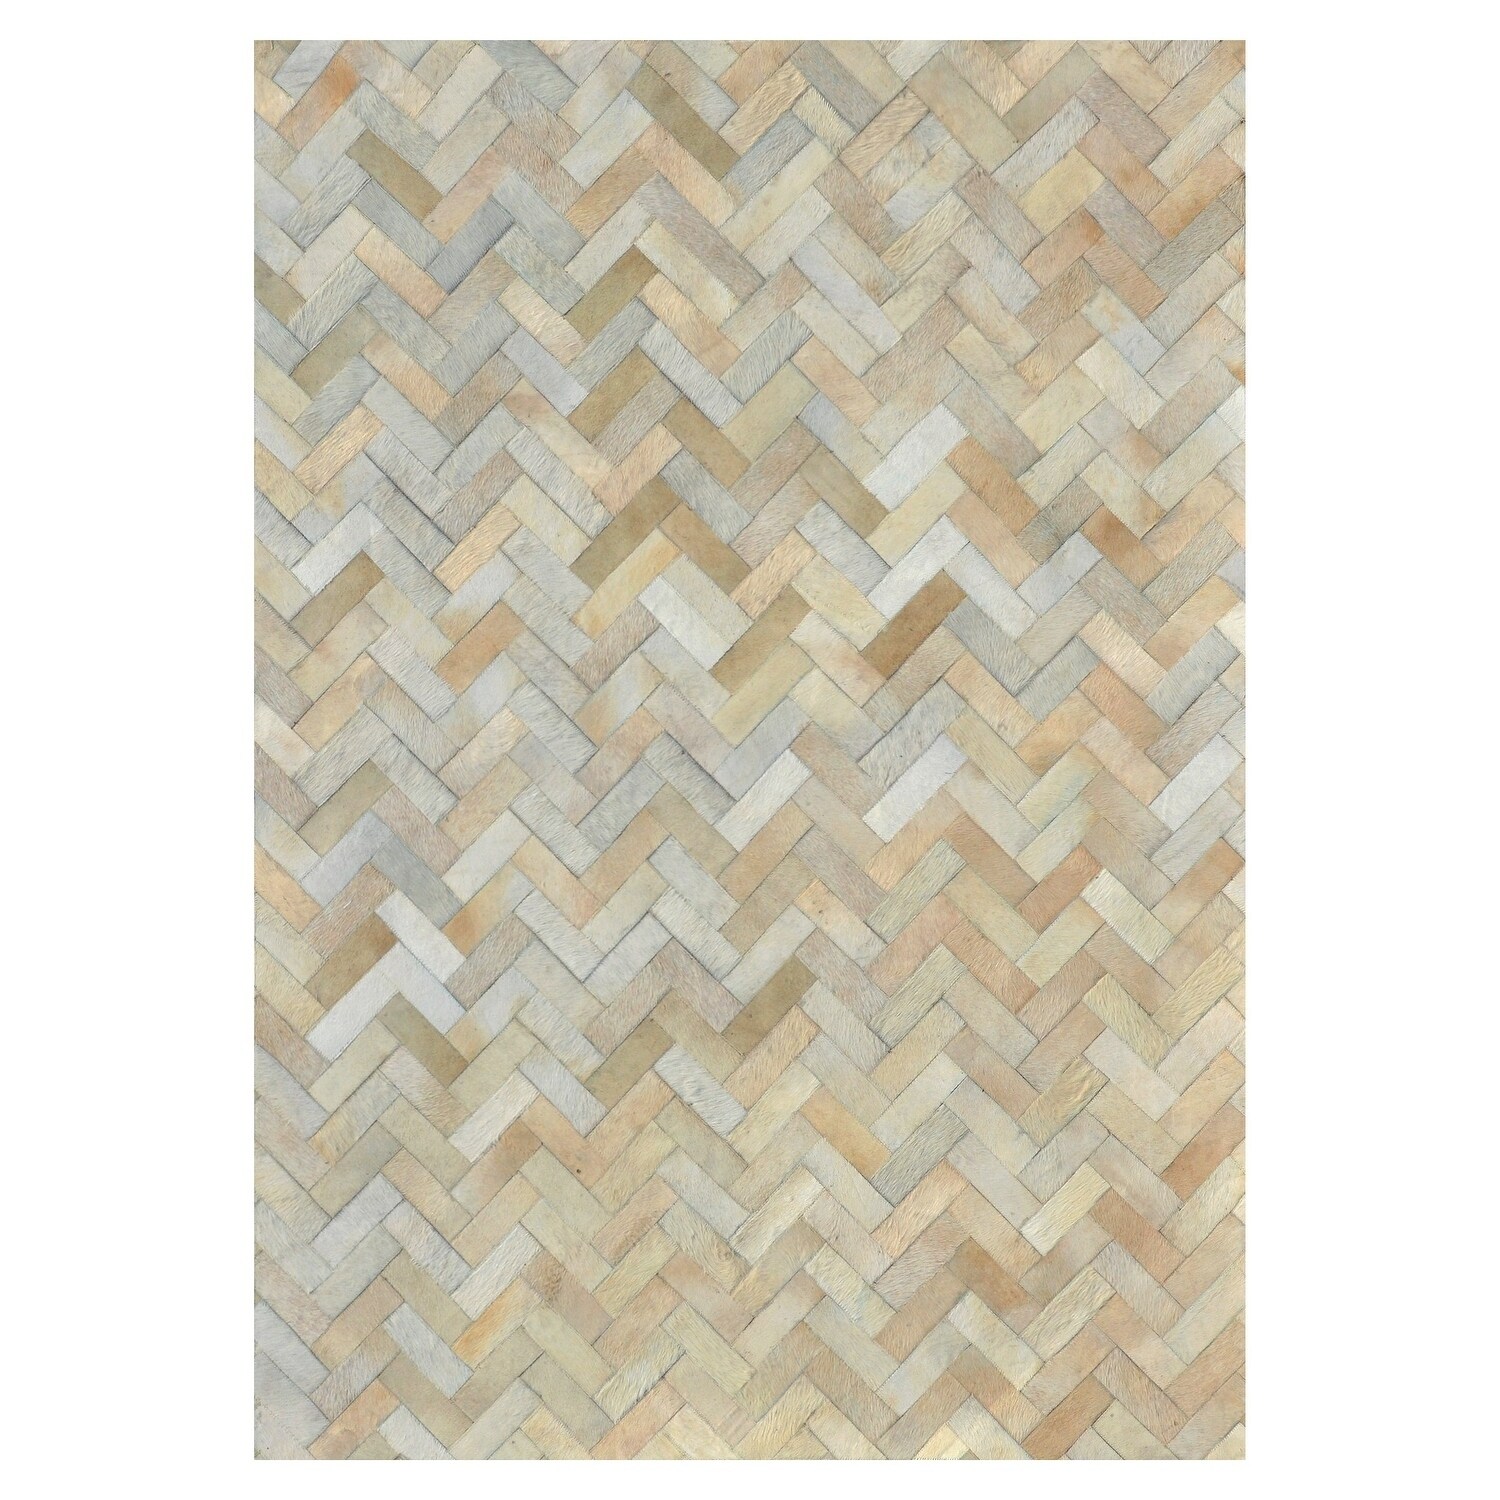 Shop Black Friday Deals On Kavka Designs Hand Stitched Patchwork Chevron Ivory Cowhide Rug 8 X 10 8 X 10 Overstock 18097660